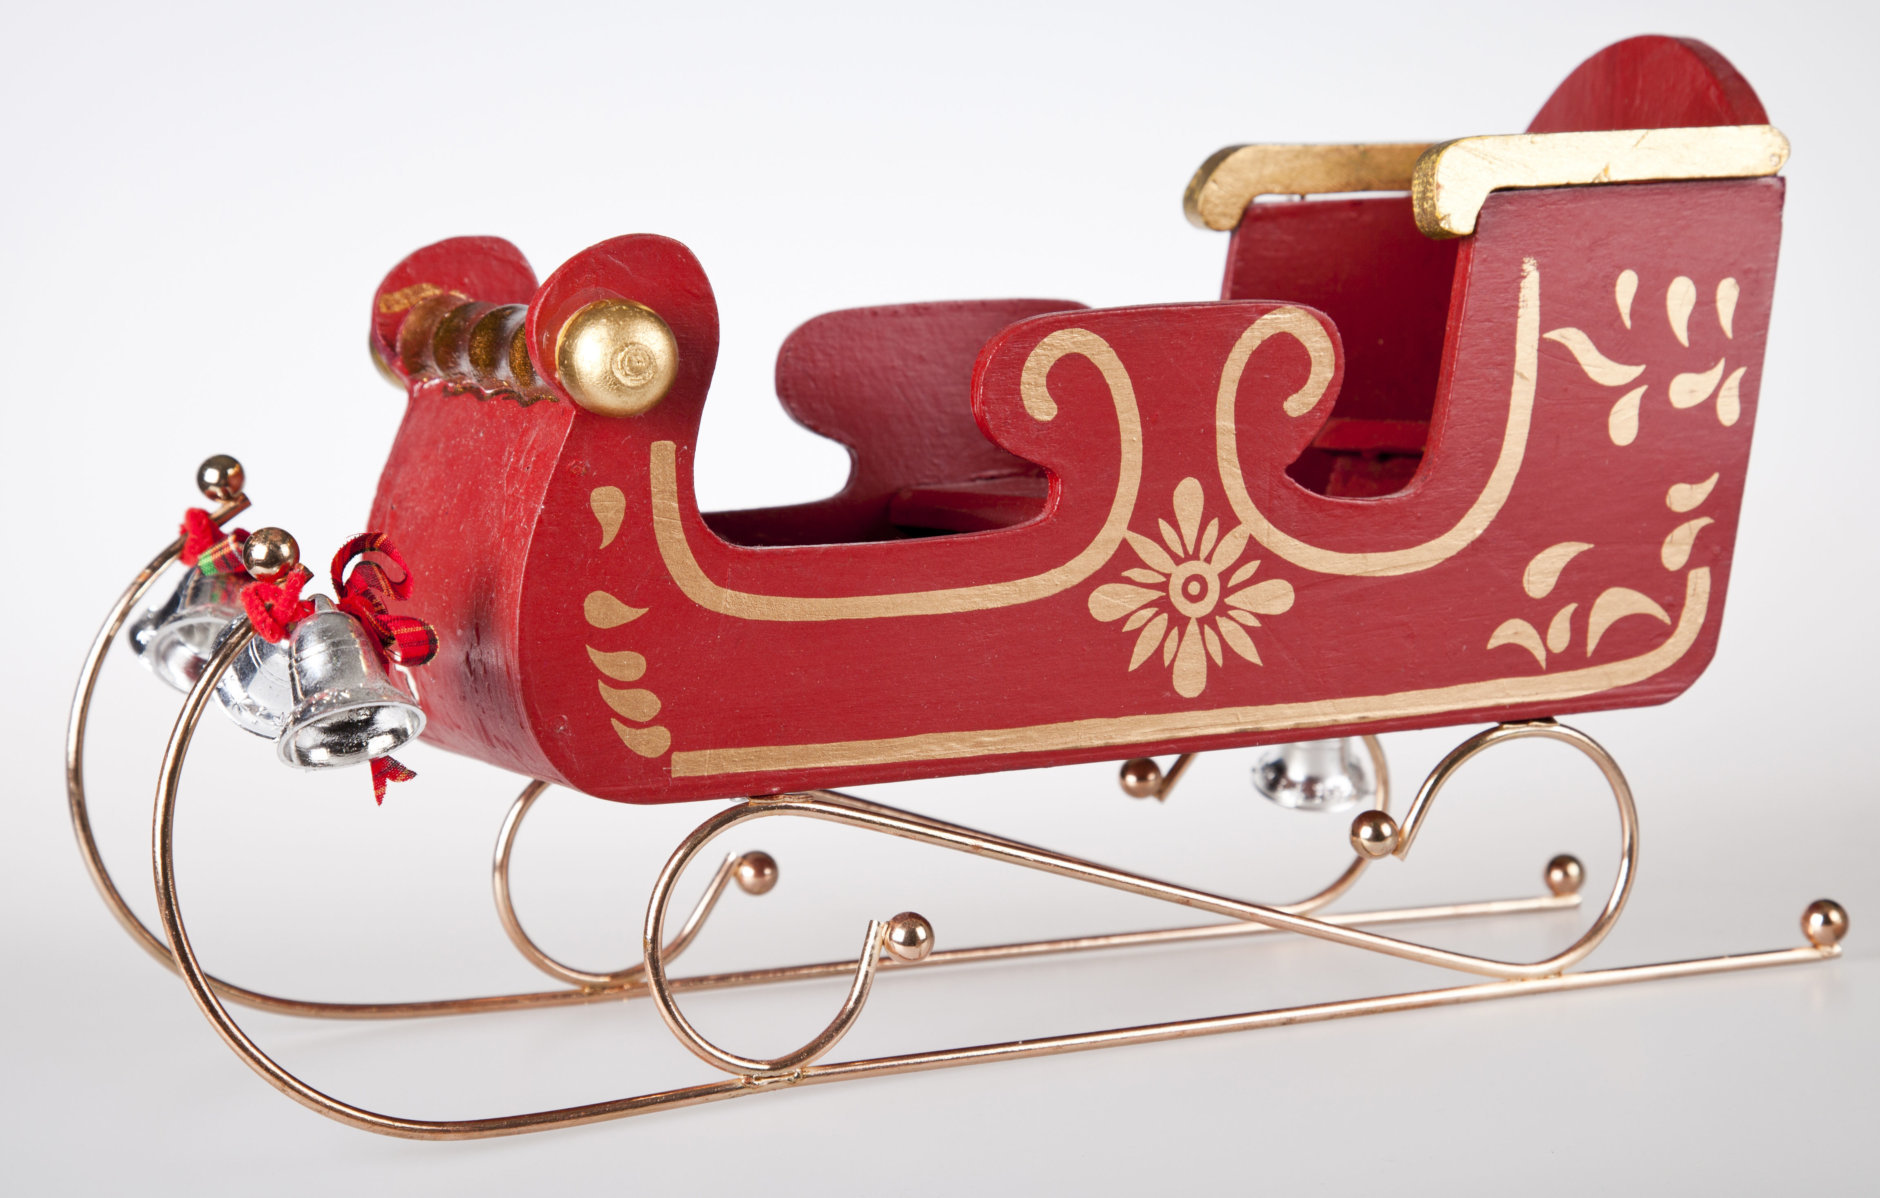 "Classic Wooden toy Santa Sleigh, with gold trimmings, and silvers bells. Shot on white background side view."